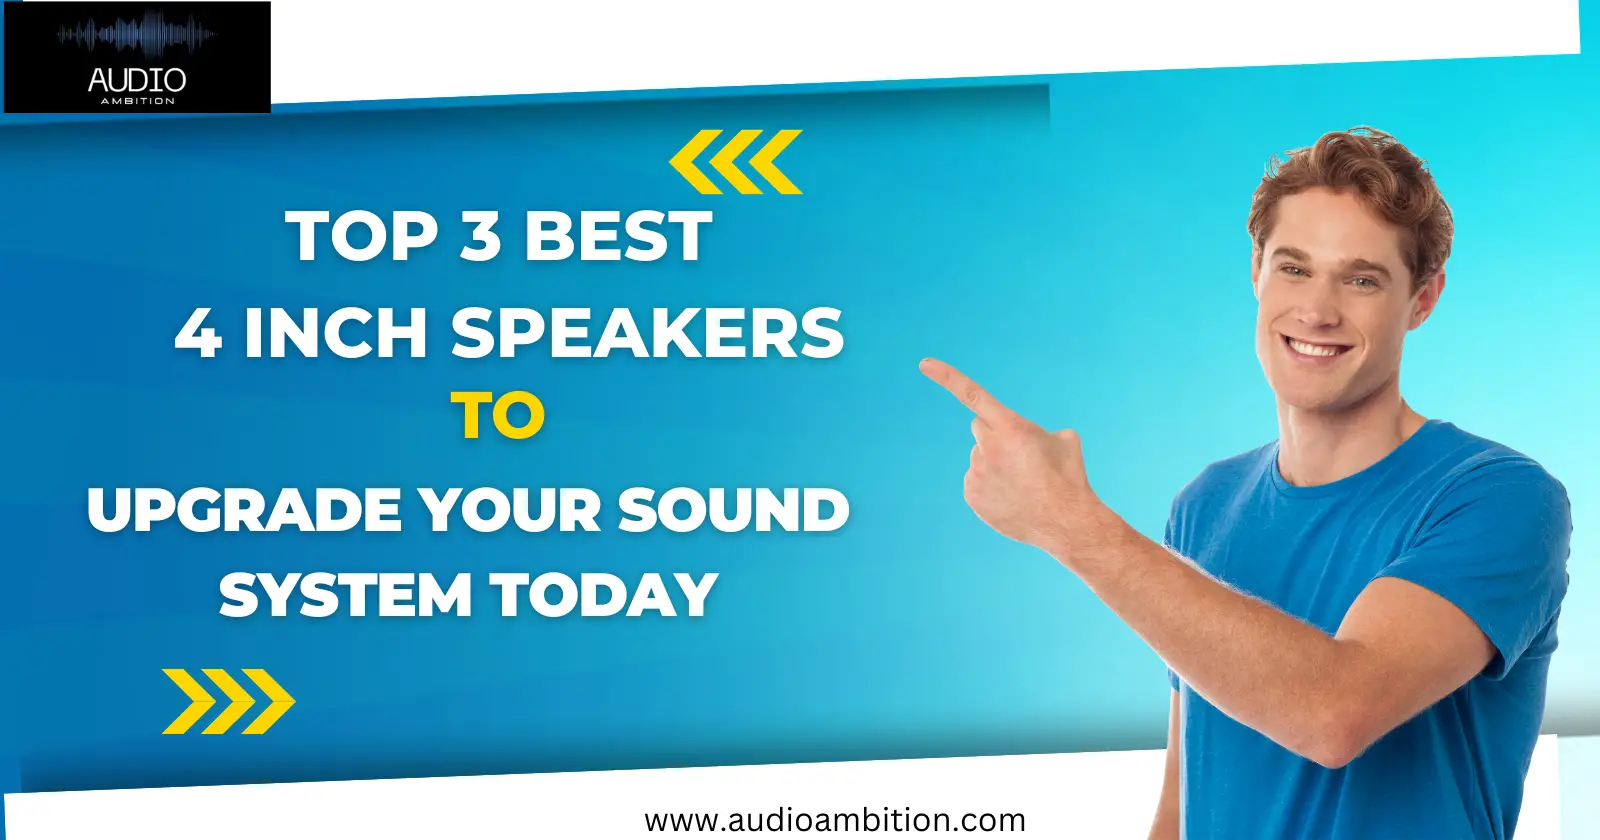 Top 3 Best 4 Inch Speakers: Upgrade Your Sound System Today!